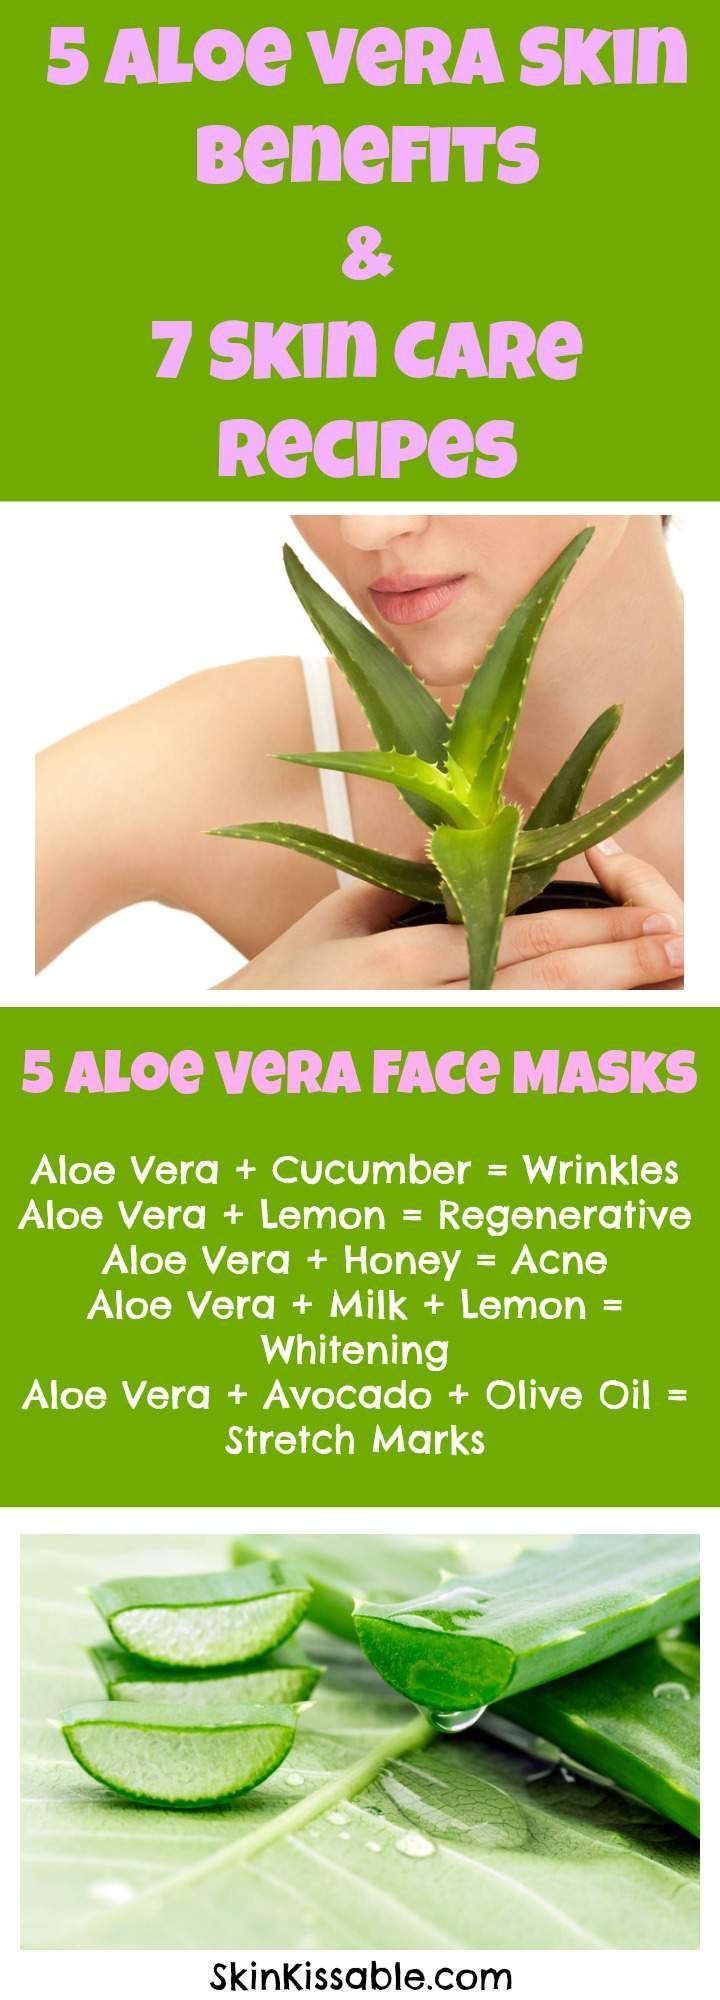 Aloe vera for skin care benefits and uses. Aloe vera homemade remedies for skin.